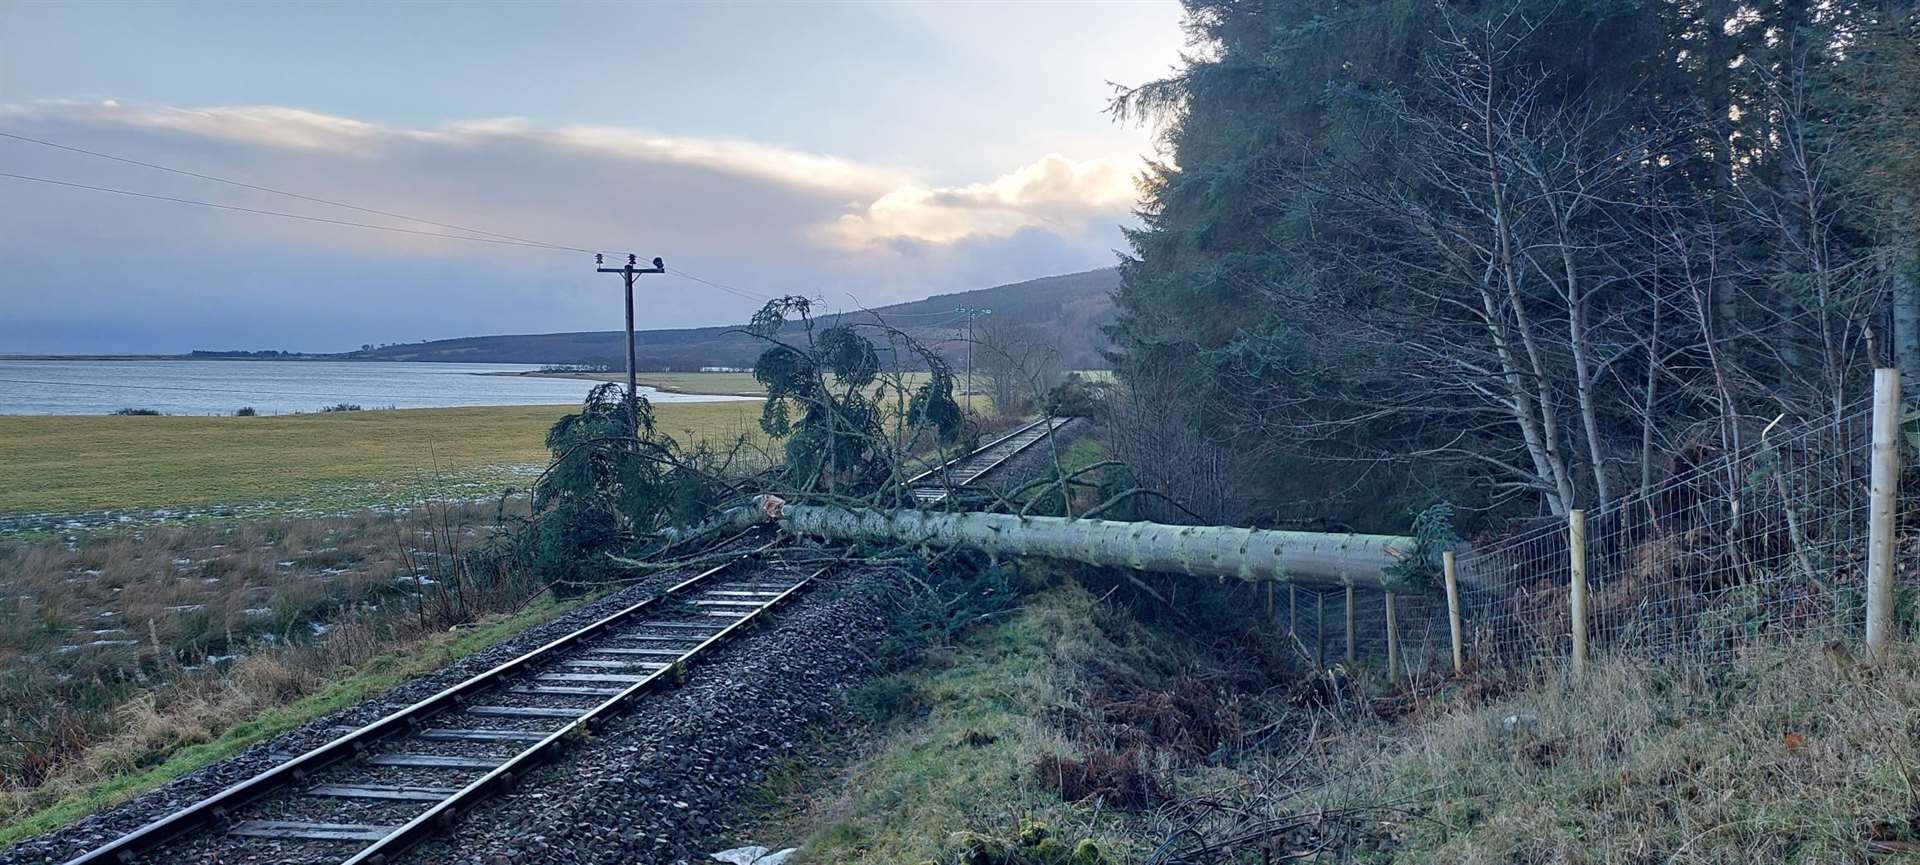 A tree was brought down by Storm Jocelyn on the rail line at Tain.